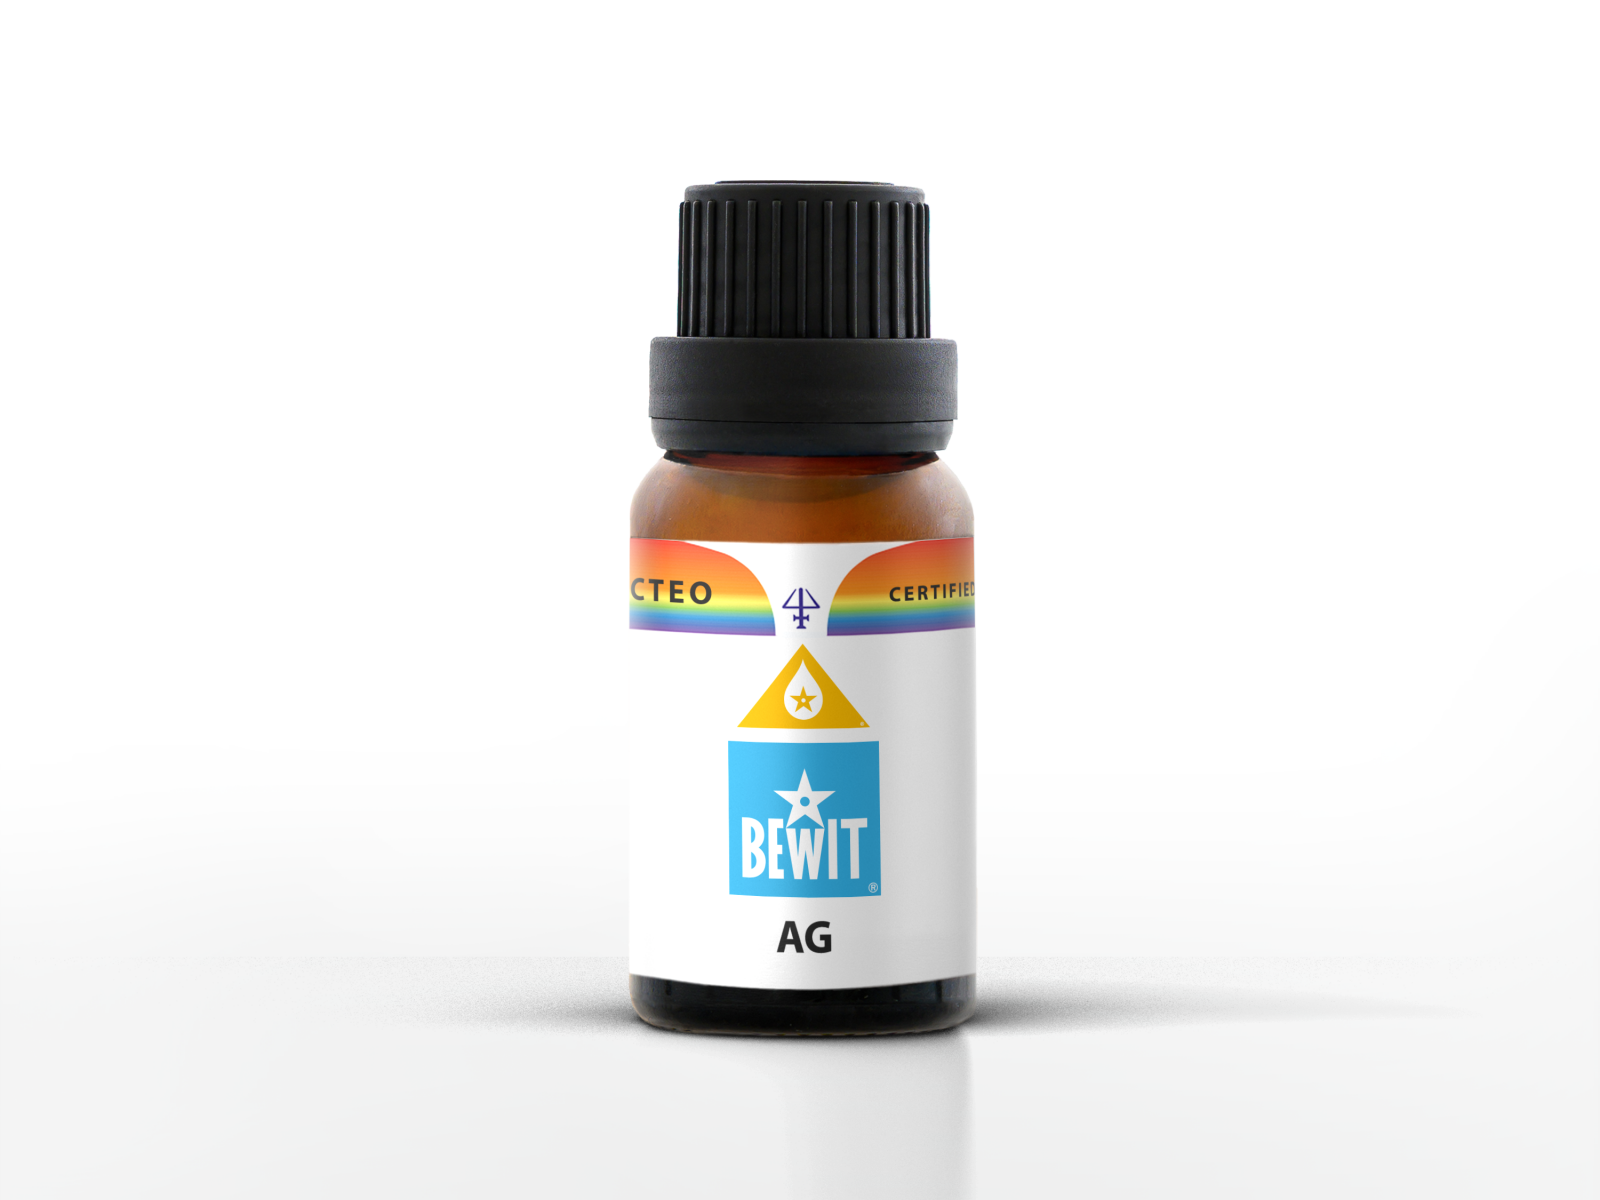 BEWIT AG - 100% natural essential oil blend in CTEO® quality - 1